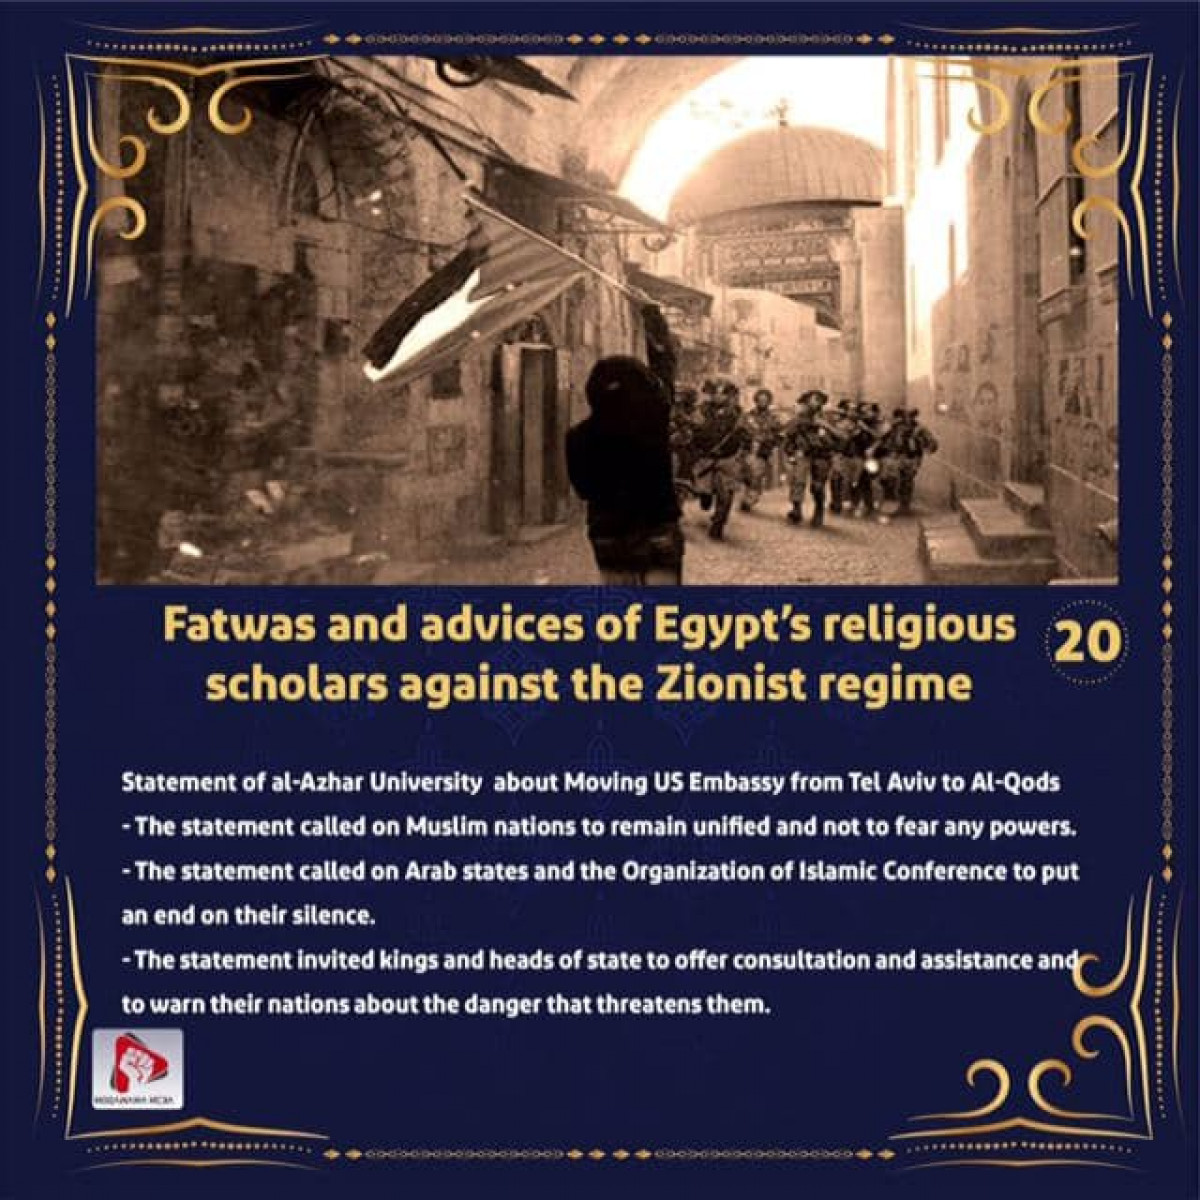 Fatwas and advices of Egypt's religious scholars against the Zionist regime 20